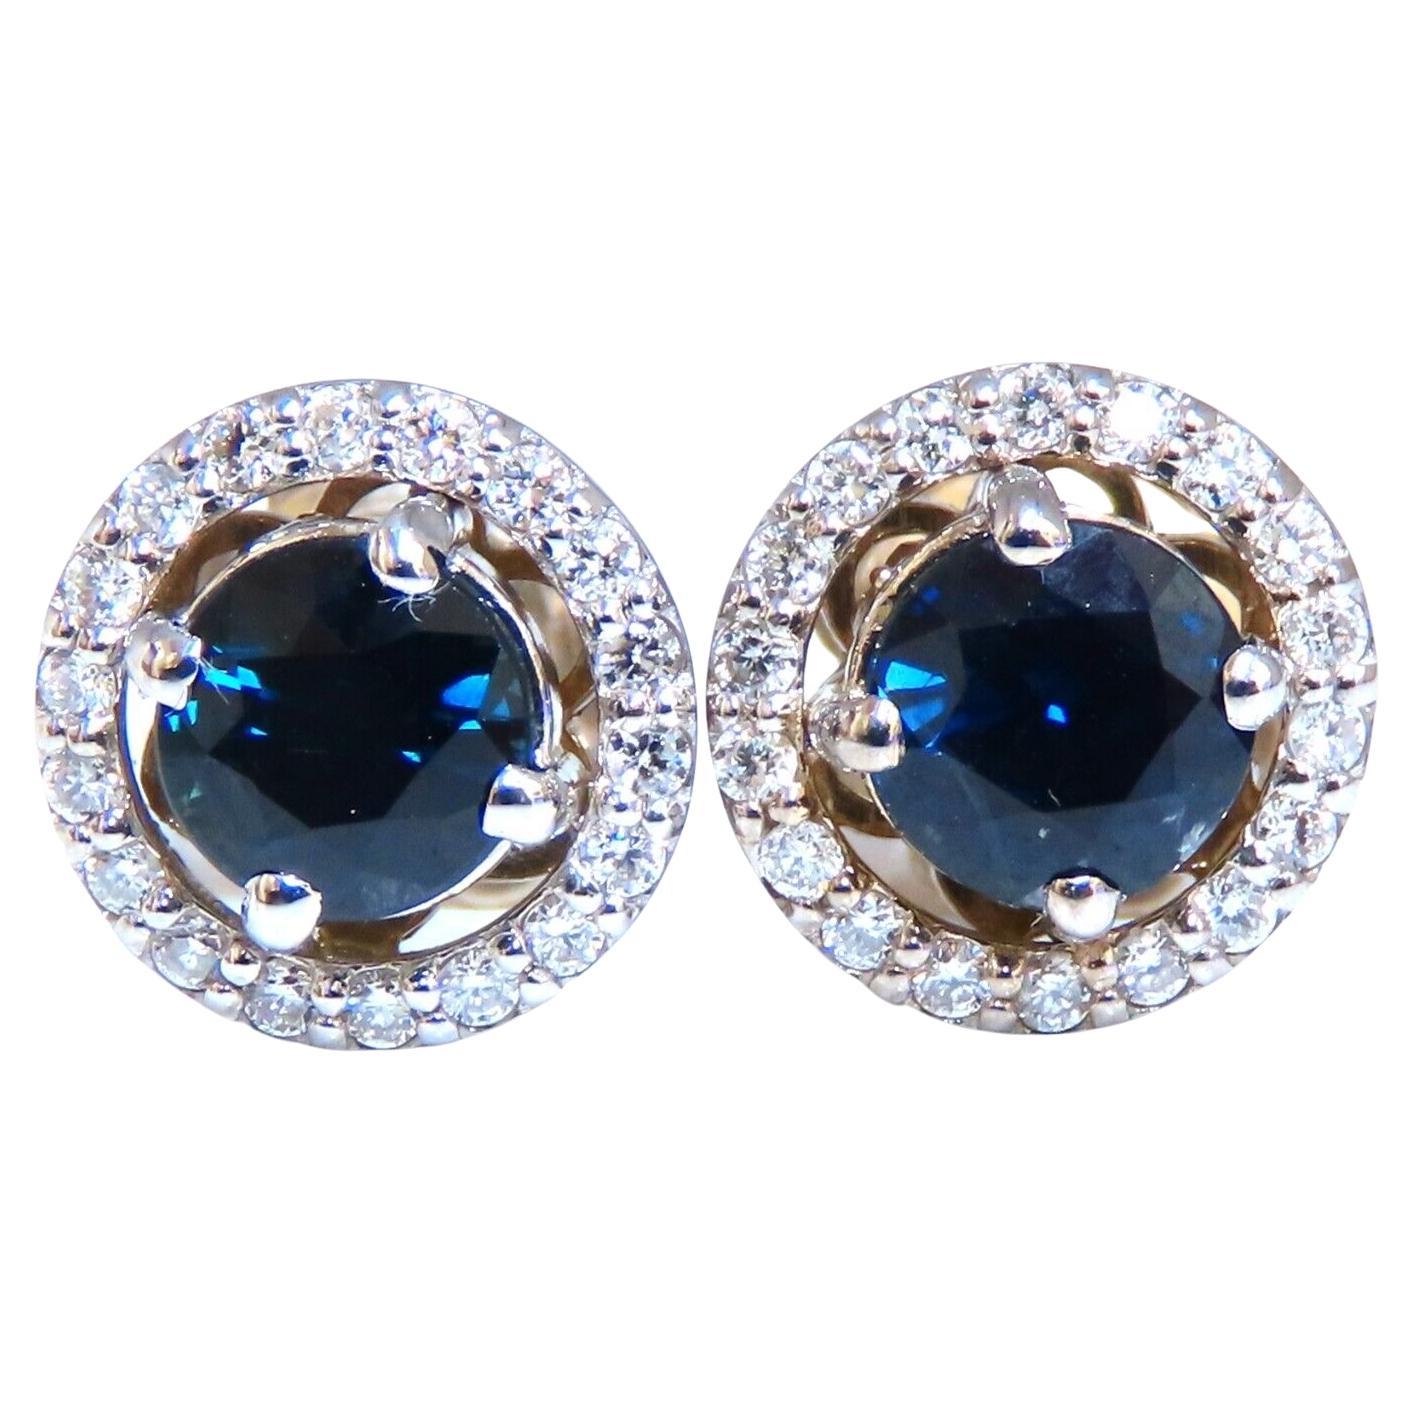 1.10ct Natural Sapphire Diamonds Cluster Earrings 14 Karat Gold For Sale